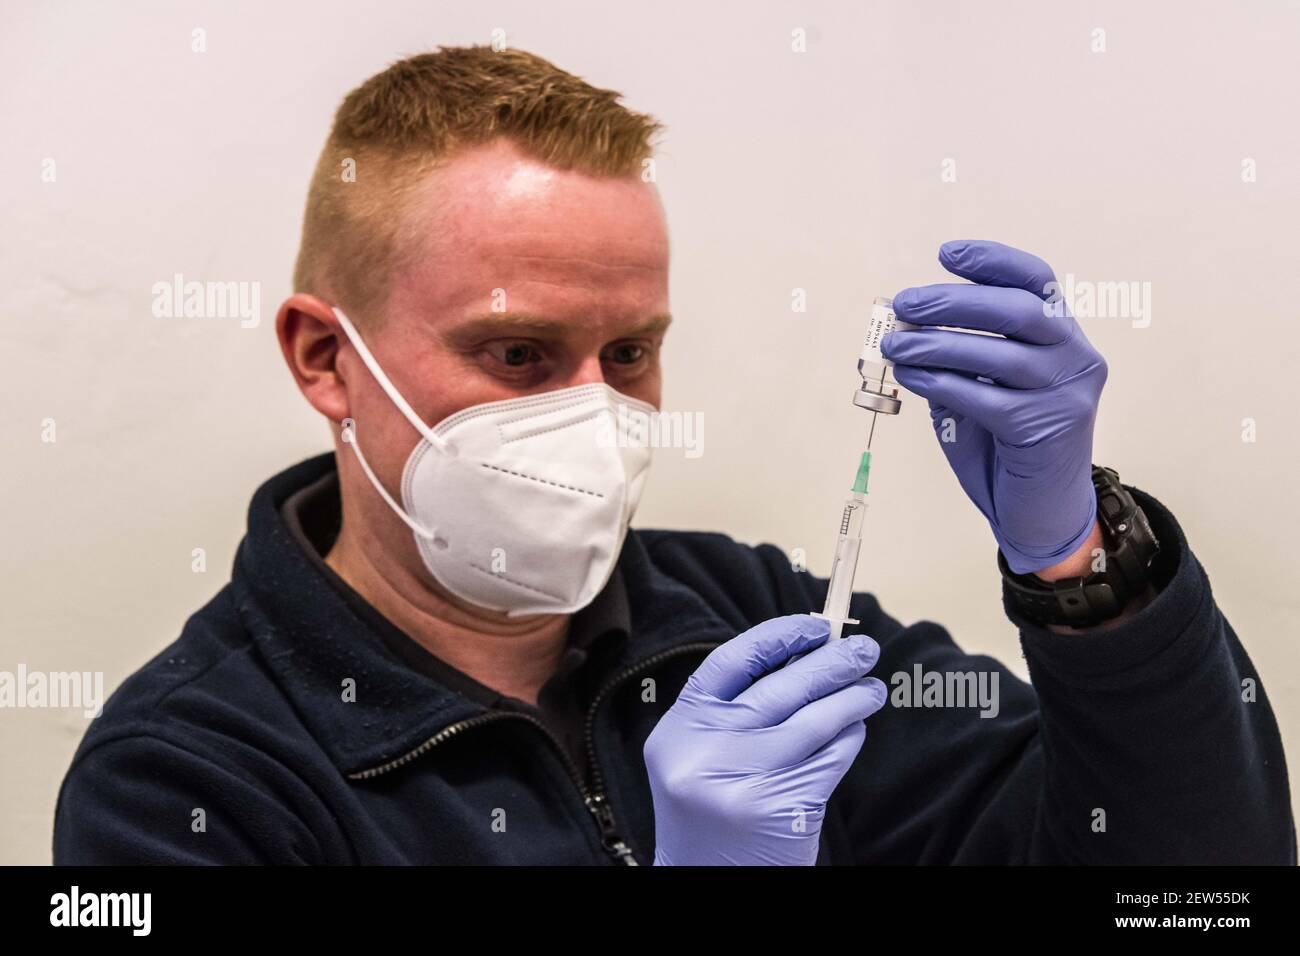 Munich, Bavaria, Germany. 2nd Mar, 2021. A medical services technician with the Munich Bereitschaftspolizei prepares the next round of vaccines by extracting a small volume from a vial. Each vial is good for ten vaccinations. Starting with some 10,000 doses of the AstraZeneca Covid-19 vaccine, the Bavarian Police has begun vaccinating its Bereitschaftspolizei and Einsatzeinheiten- specialized police units that deal with demonstrations, riots, and other missions. Germany's vaccine program has been criticized for being extremely slow, with numerous nations surpassing not only percentage of Stock Photo